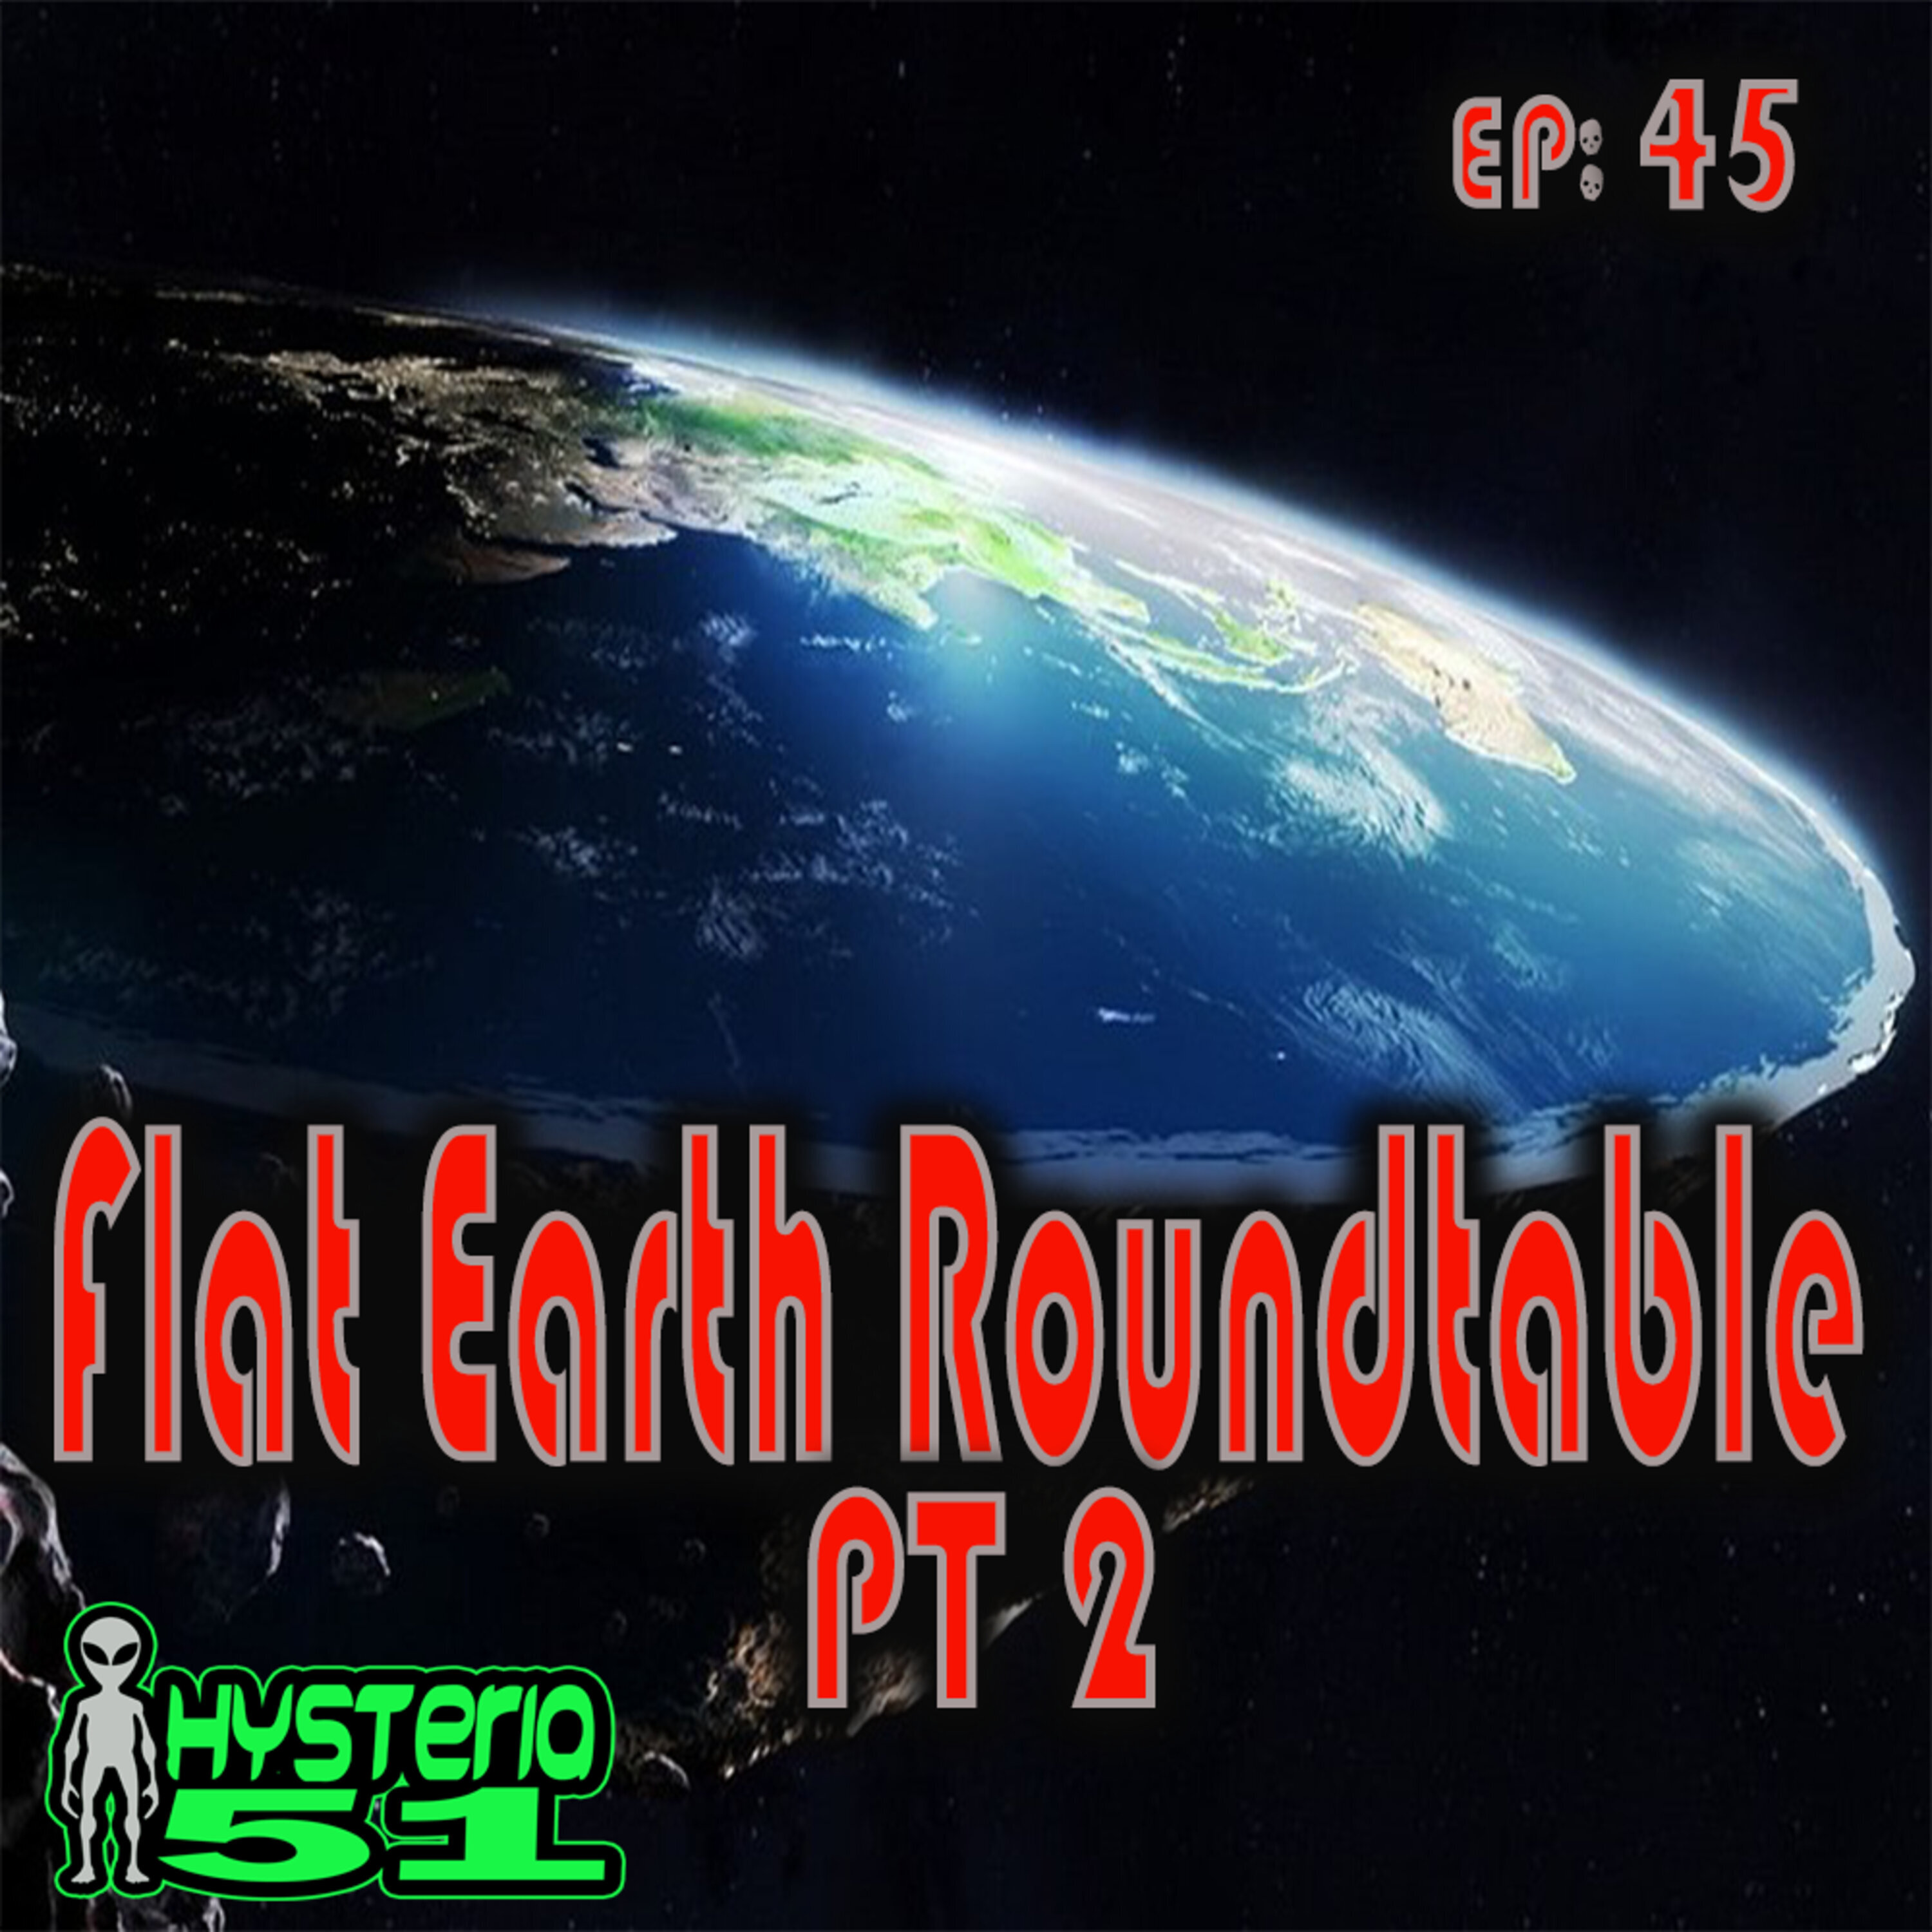 Flat Earth Roundtable pt 2 | 45 Image